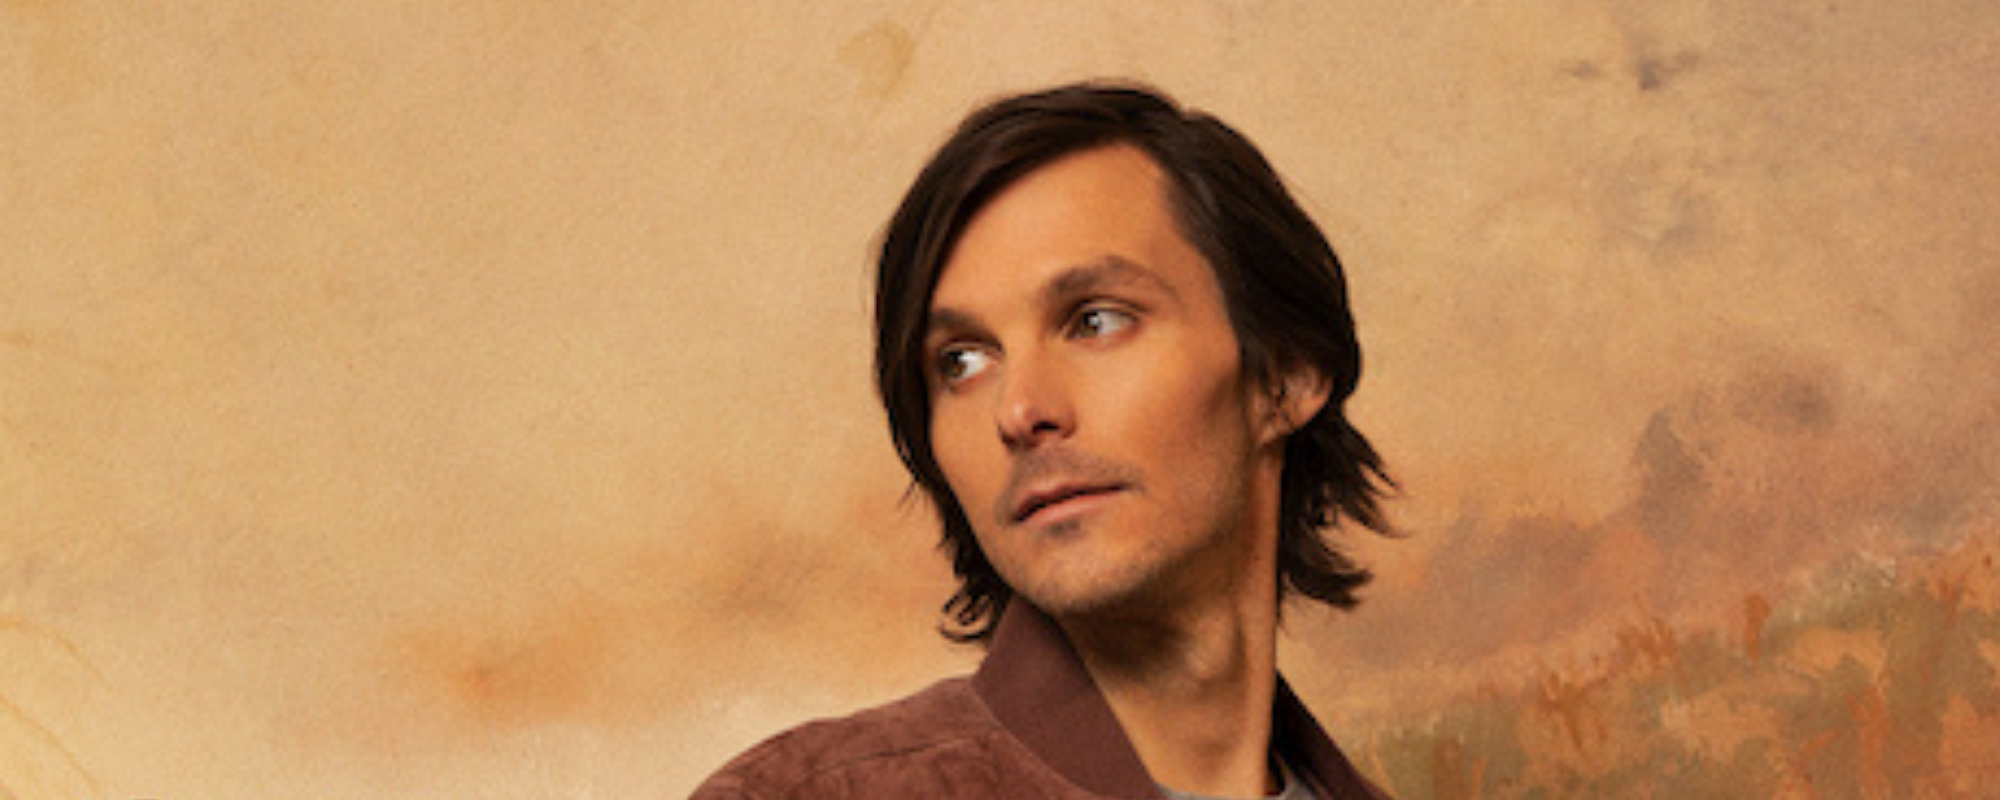 Charlie Worsham’s New EP ‘Sugarcane’ Picks Up Where He Thought His Music Career Ended